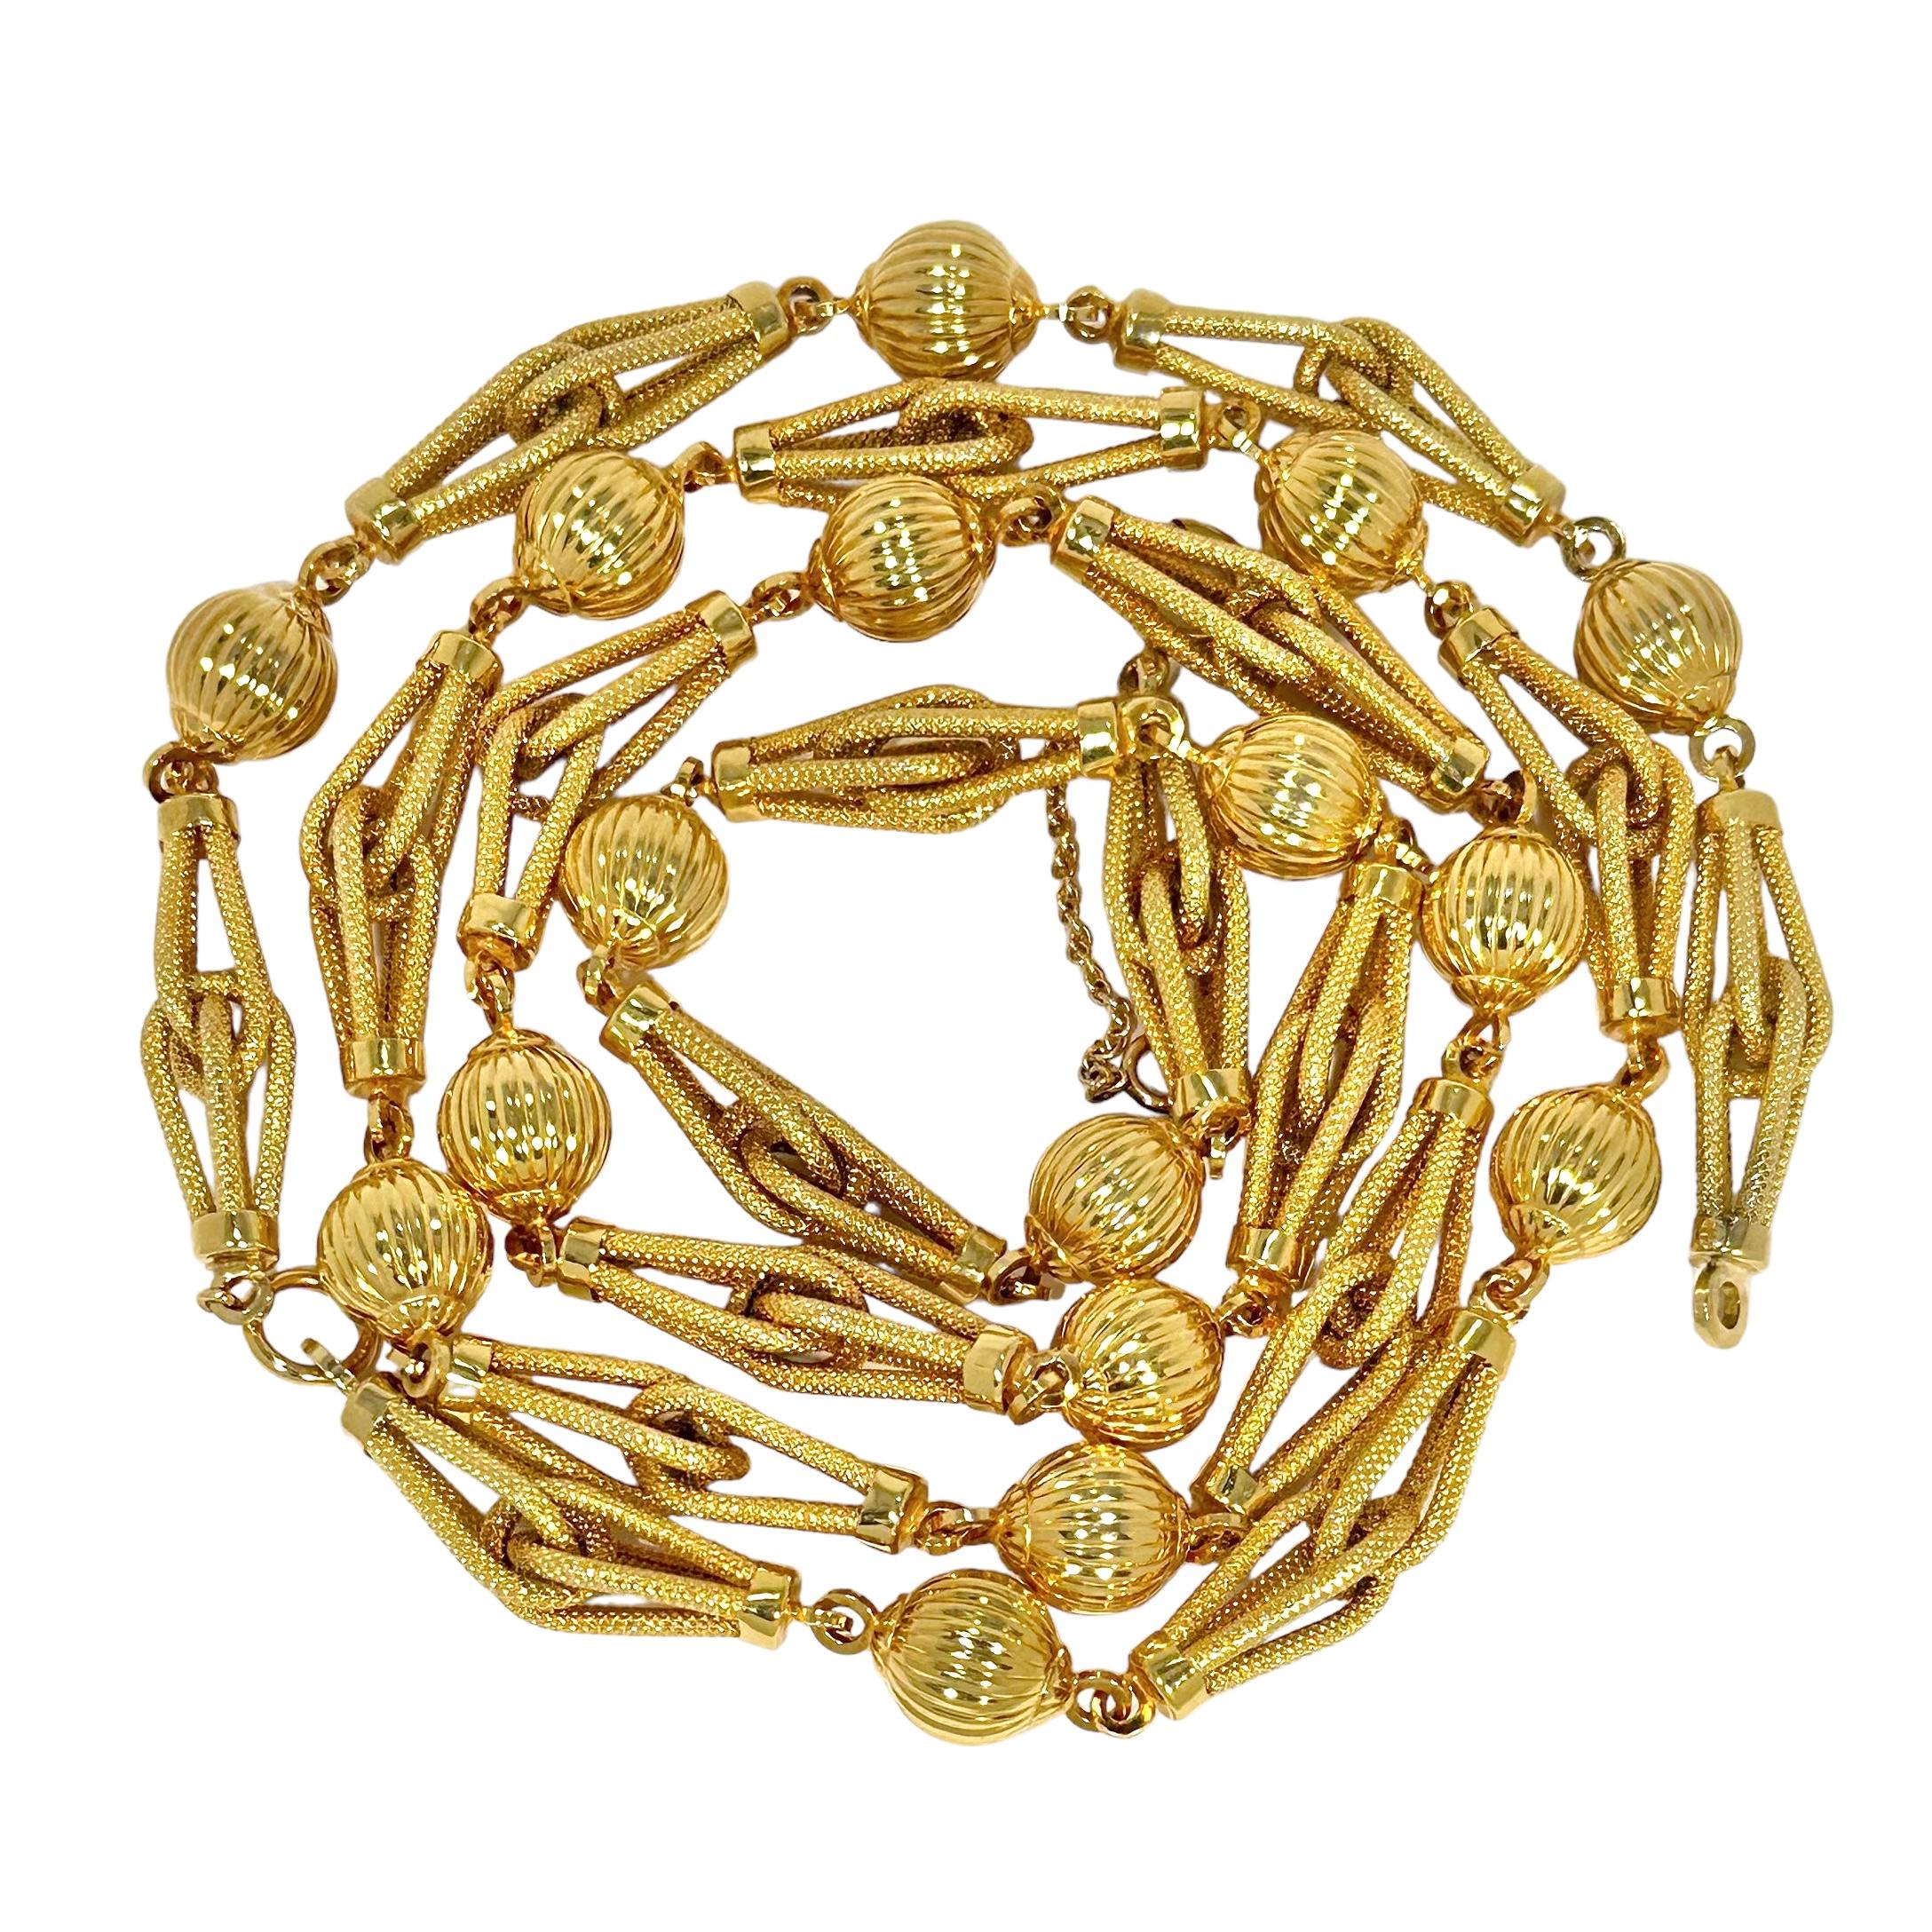 This delightful Italian, Mid-20th Century 36 1/4 inch long necklace and bracelet combination by Uno-A-Erre, is deftly crafted and classic in style. Interlocking stippled 1 3/8 inch long links alternate with 10mm diameter melon fluted round links to